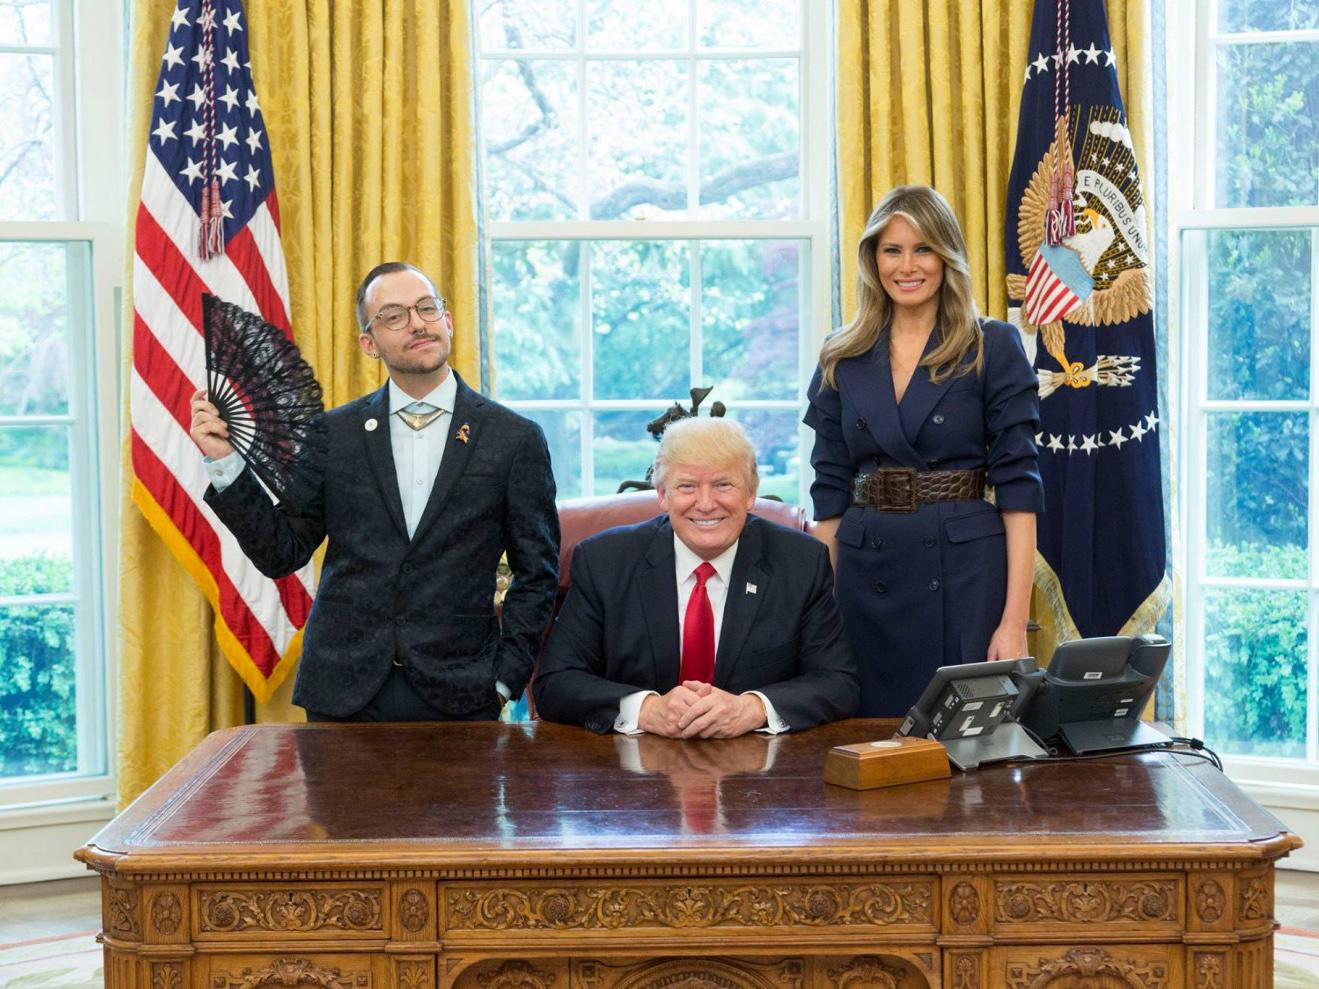 Nikos Giannopoulos with Donald and Melania Trump in the Oval Office